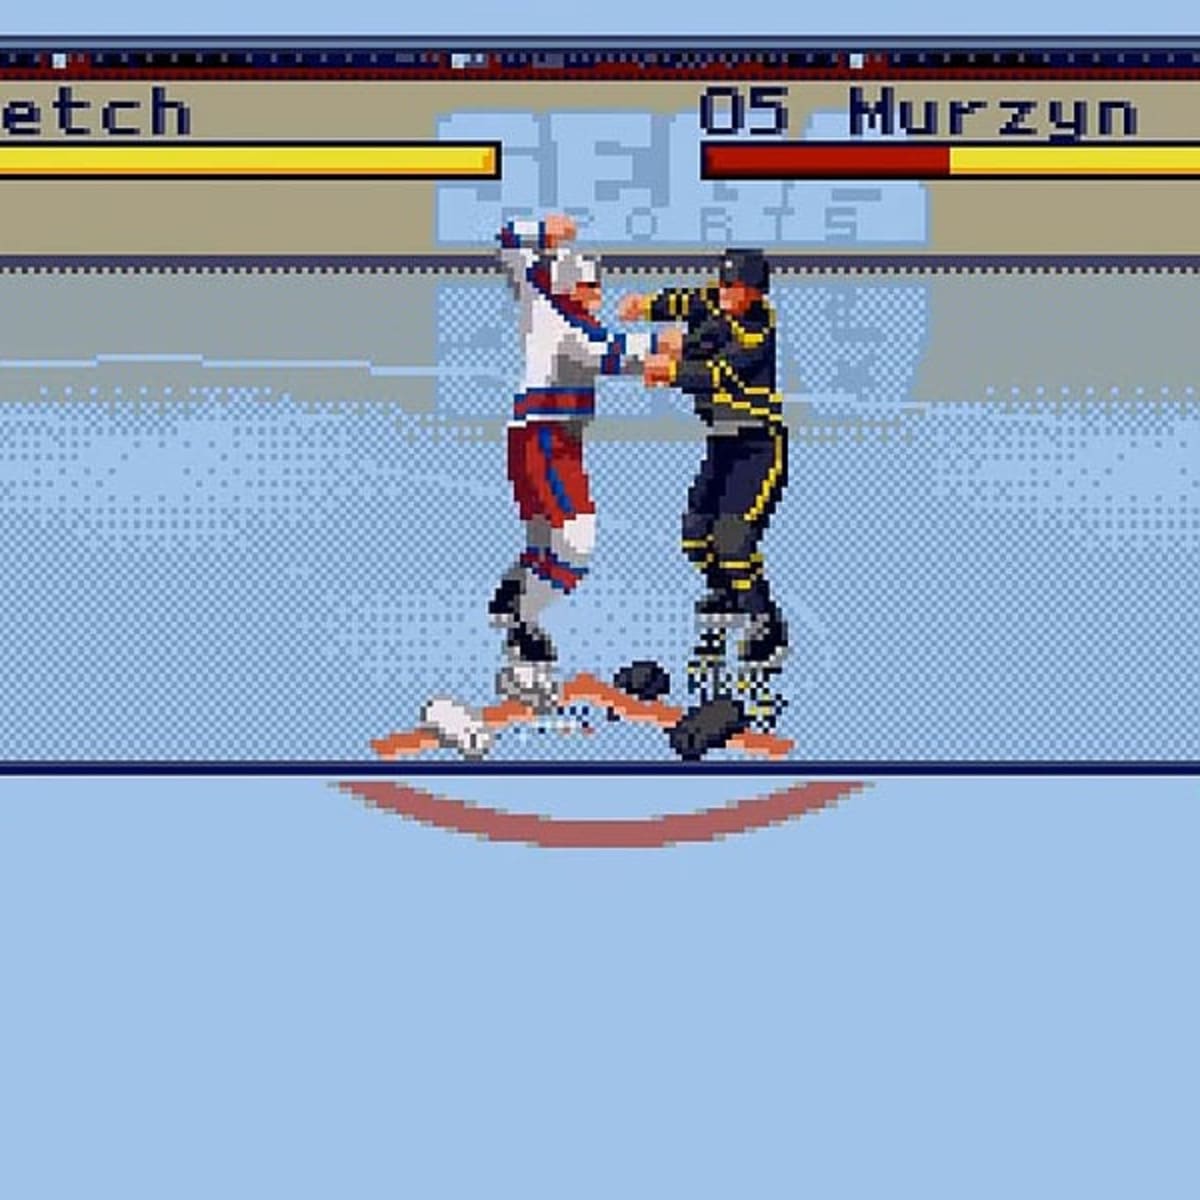 An Ode to NHL 94: The Best Game Ever